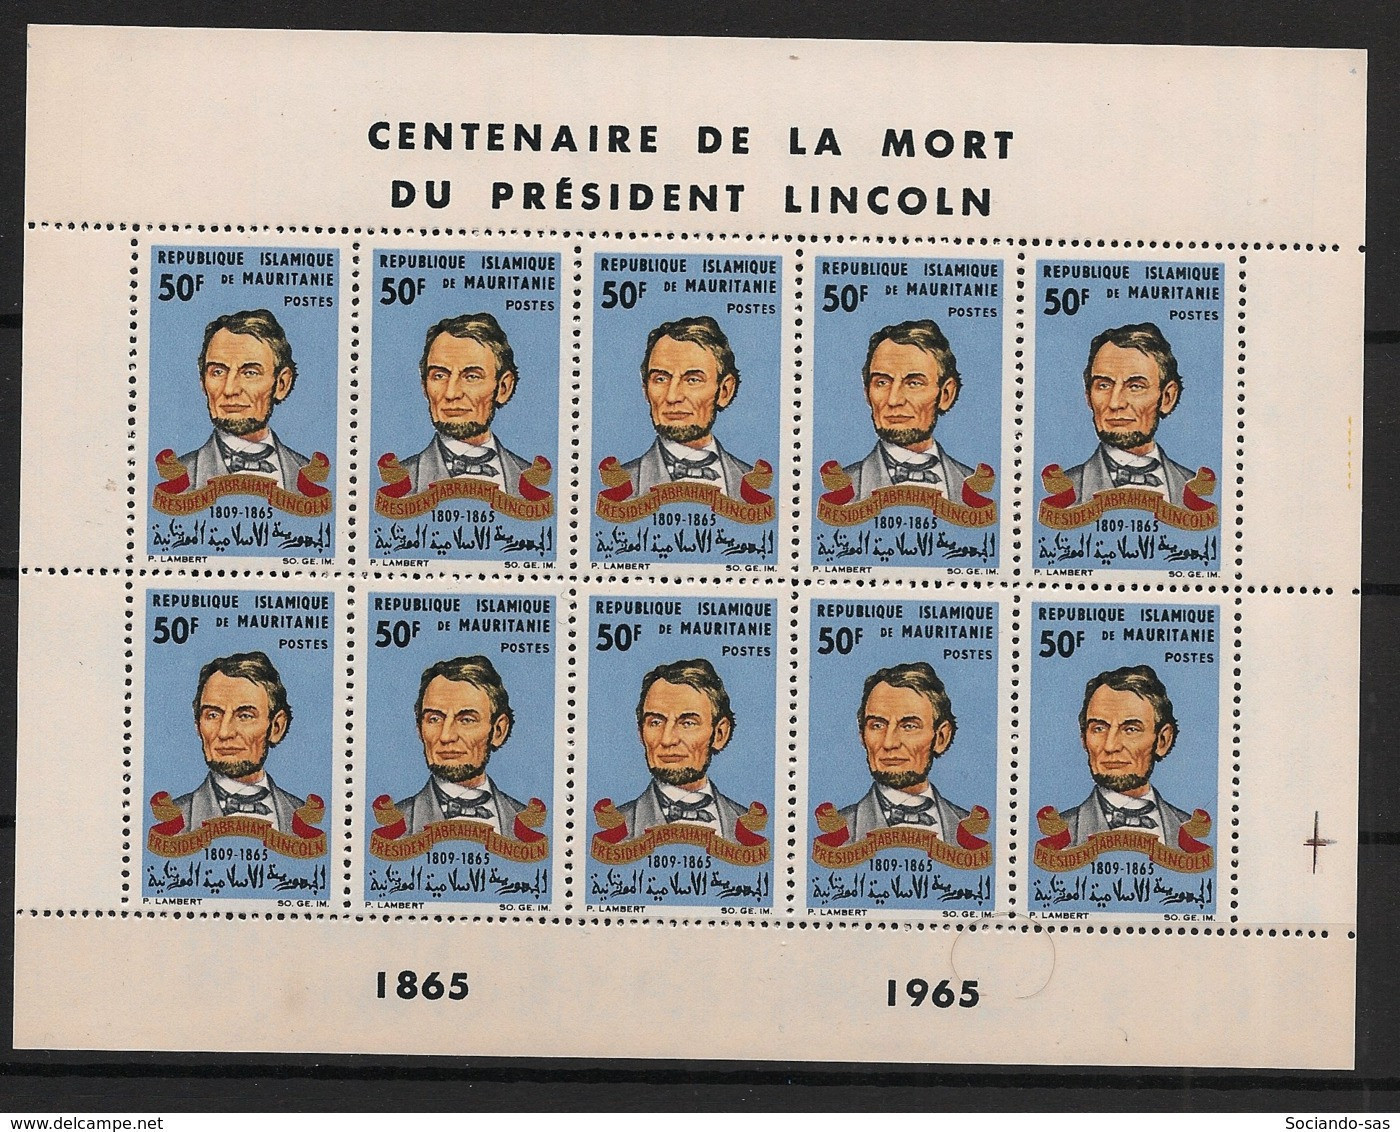 MAURITANIE - 1965 - N°YT. 191 - Lincoln - Feuille Complète - Neuf Luxe ** / MNH / Postfrisch - Mauritania (1960-...)